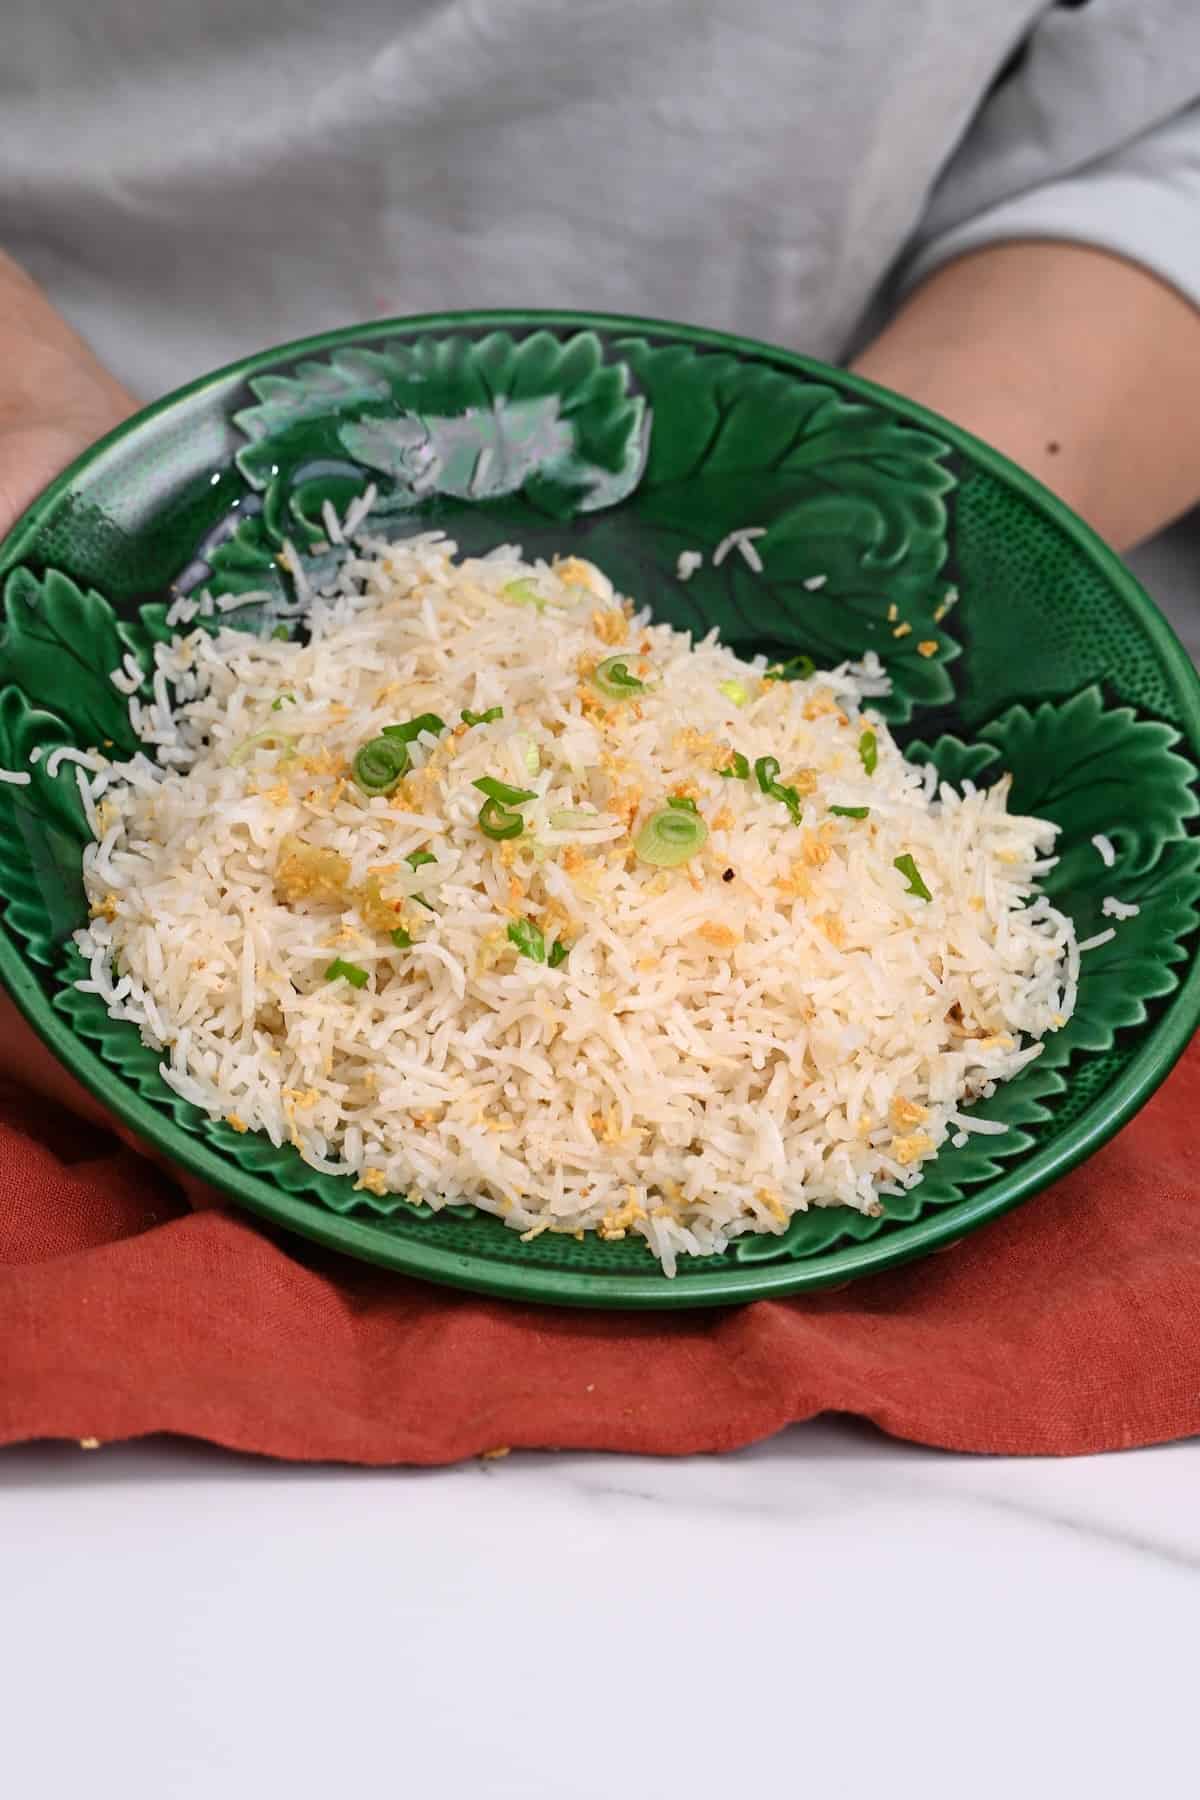 Garlic rice topped with green onion in a bowl